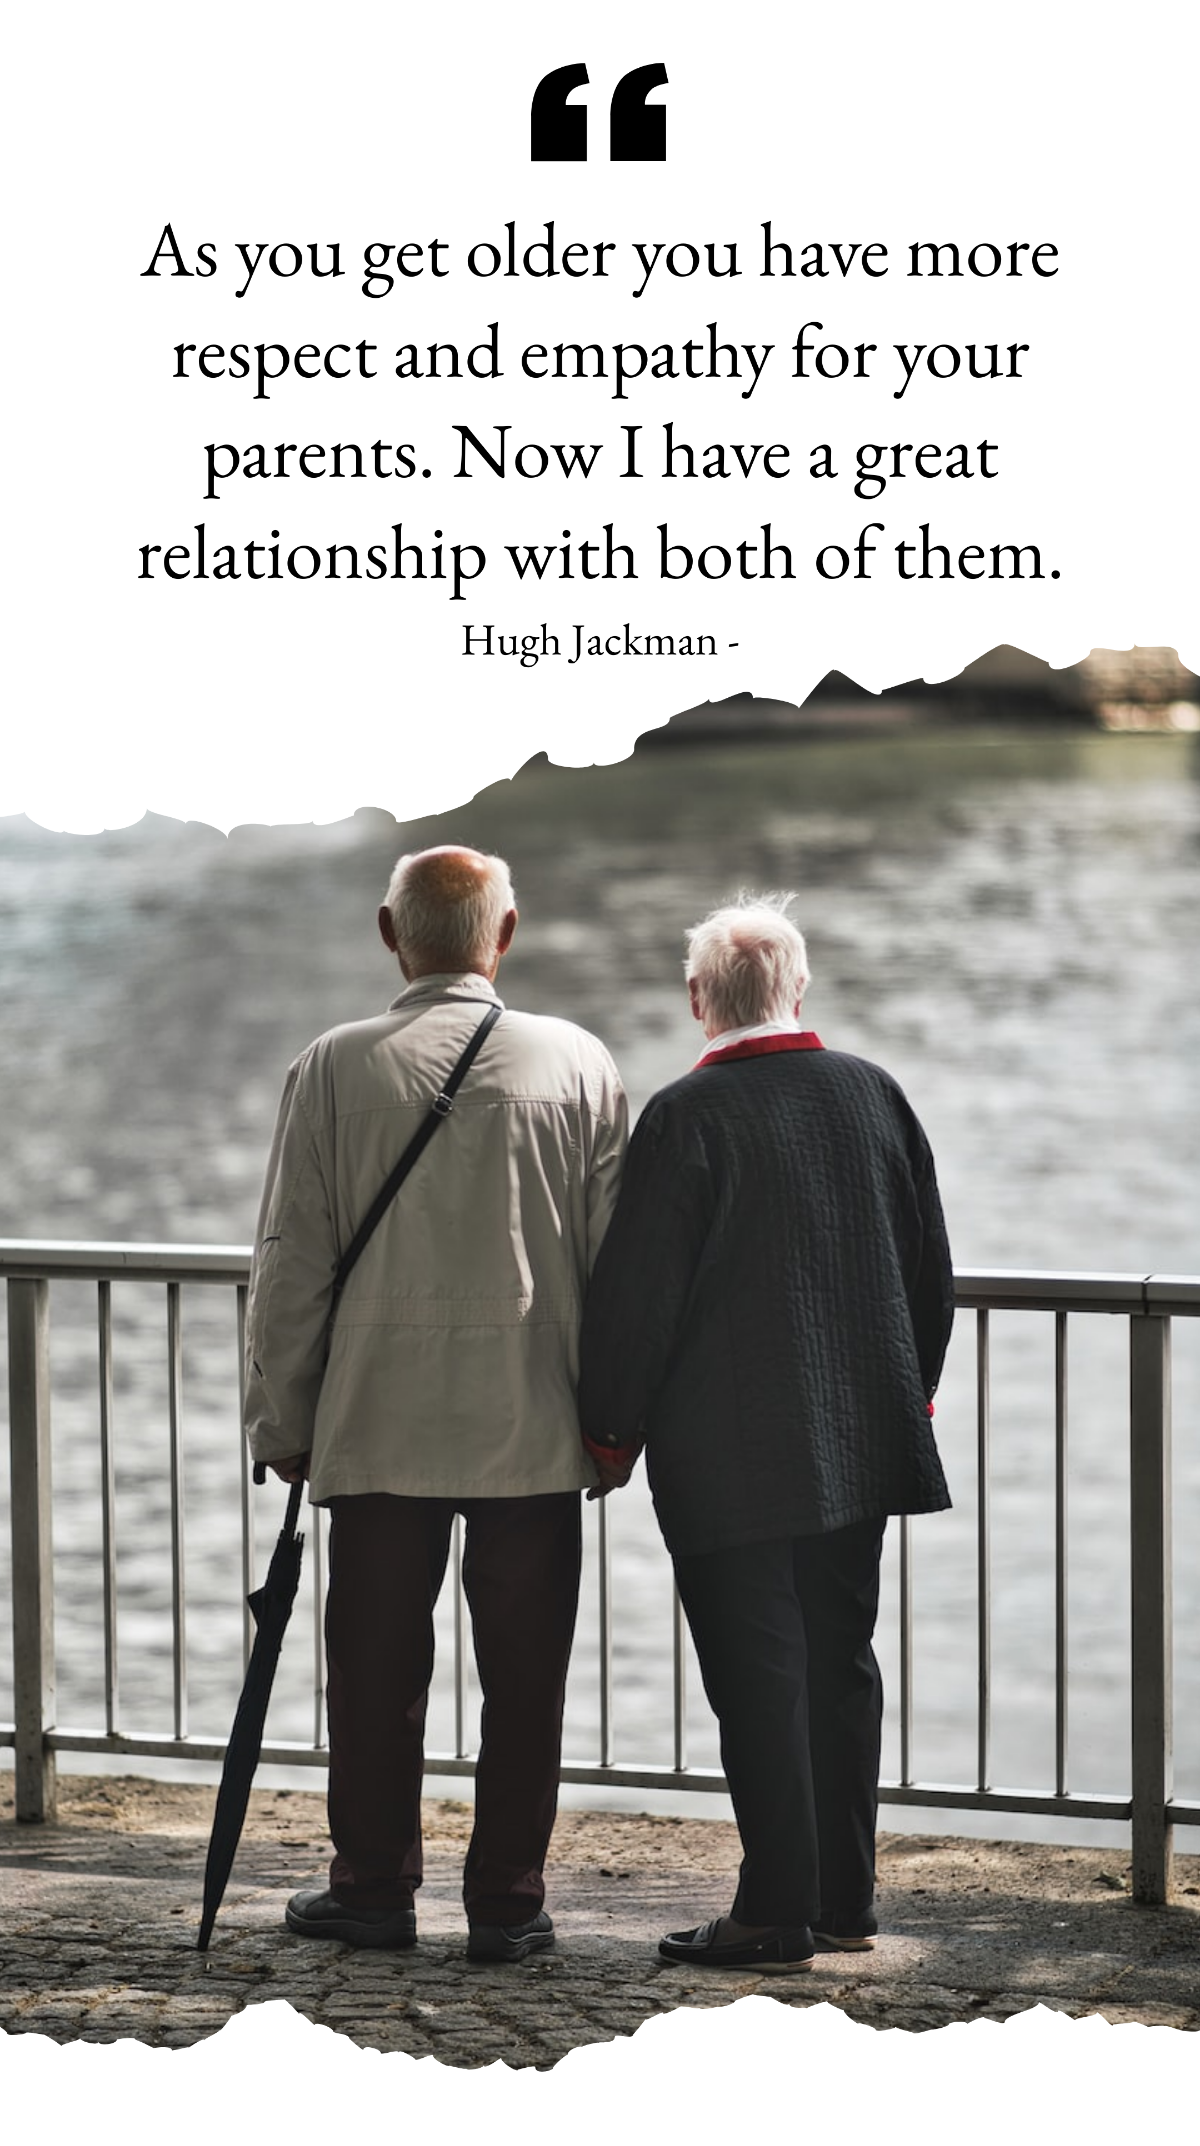 Hugh Jackman - As you get older you have more respect and empathy for your parents. Now I have a great relationship with both of them. Template